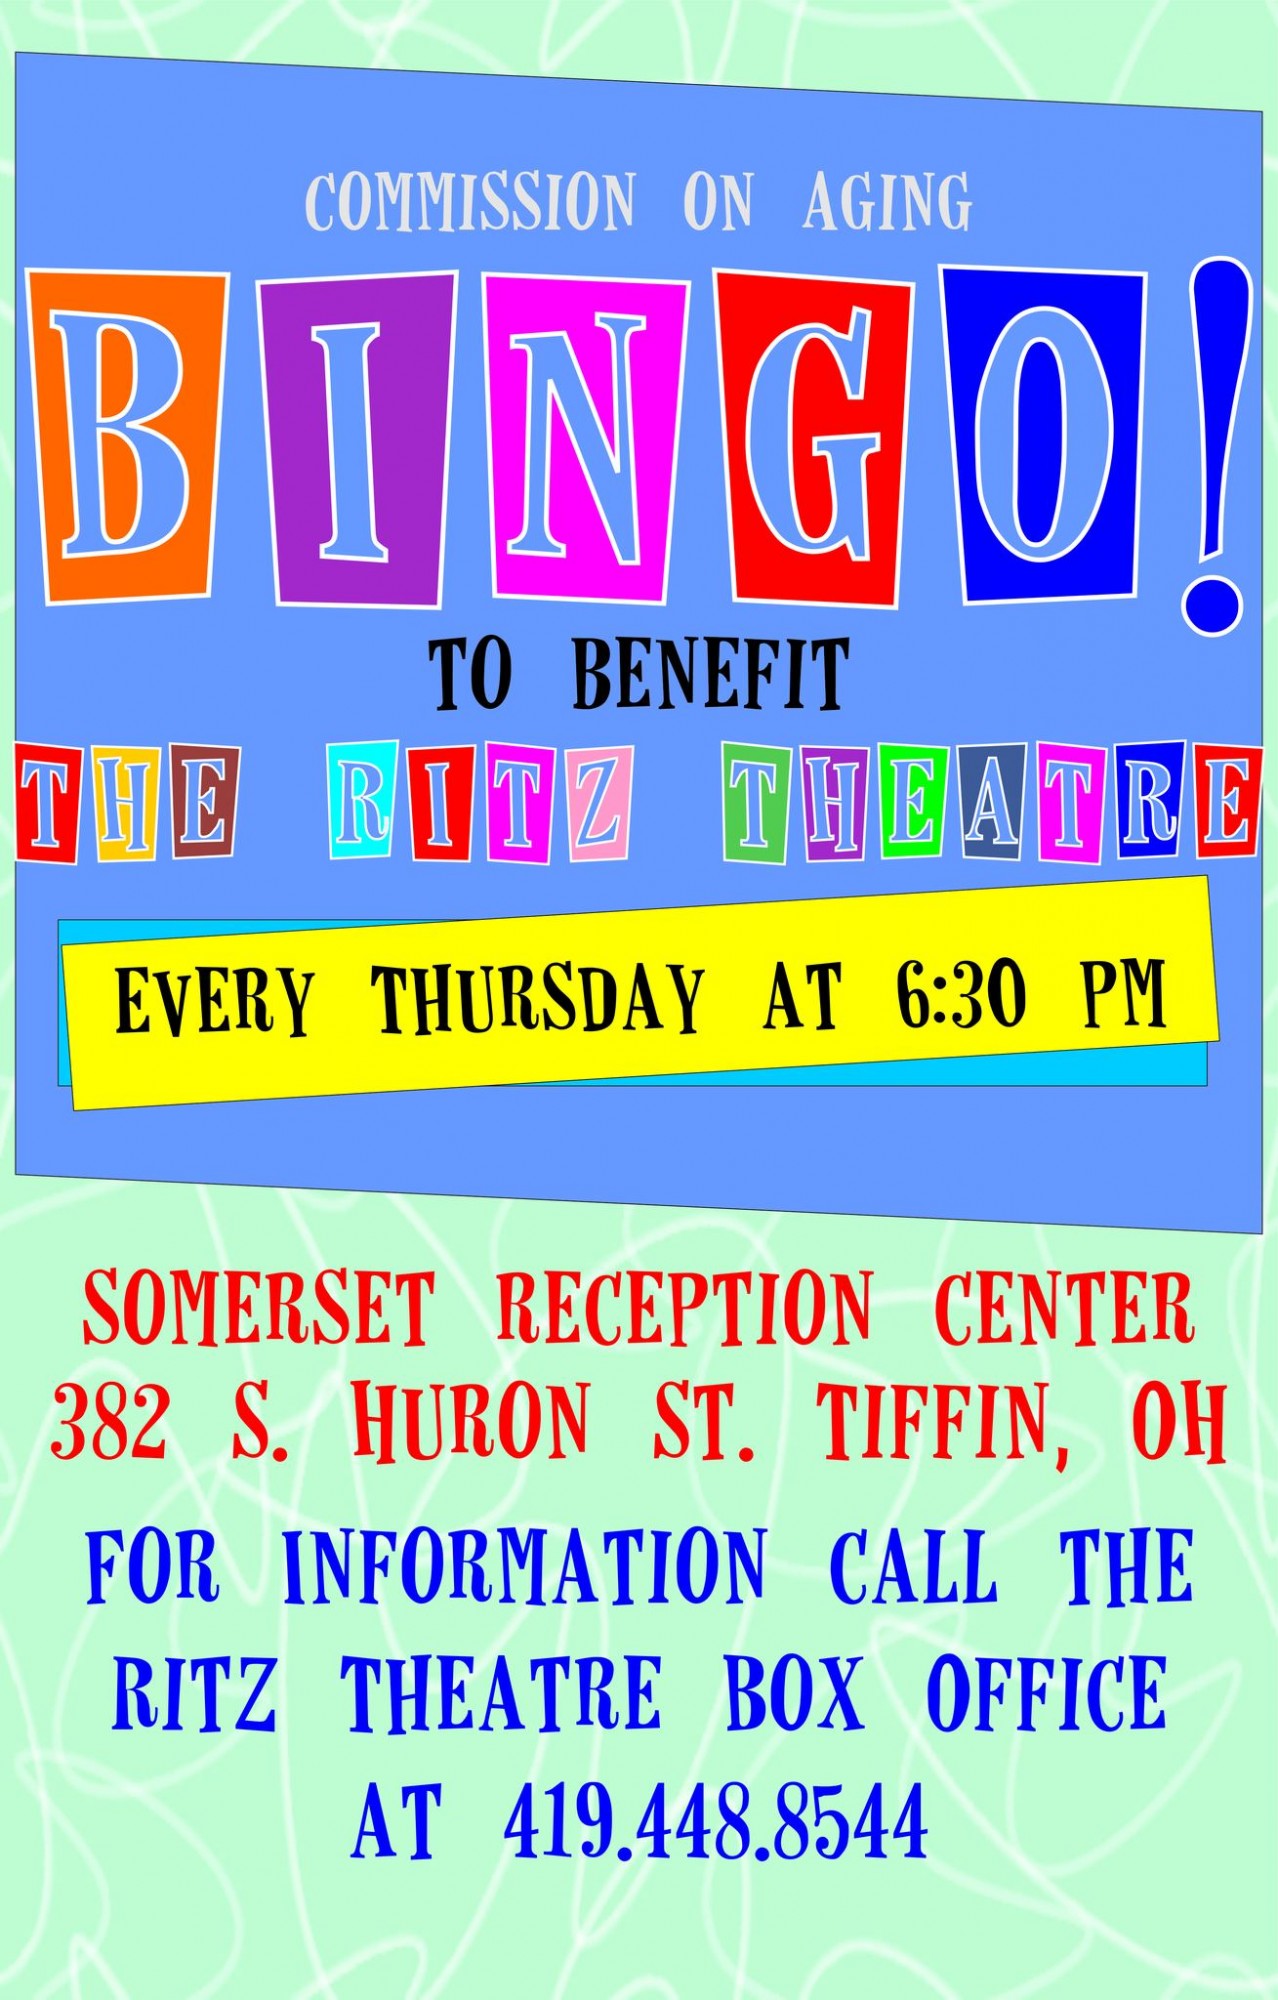 Commission on Aging BINGO to benefit The Ritz Theatre